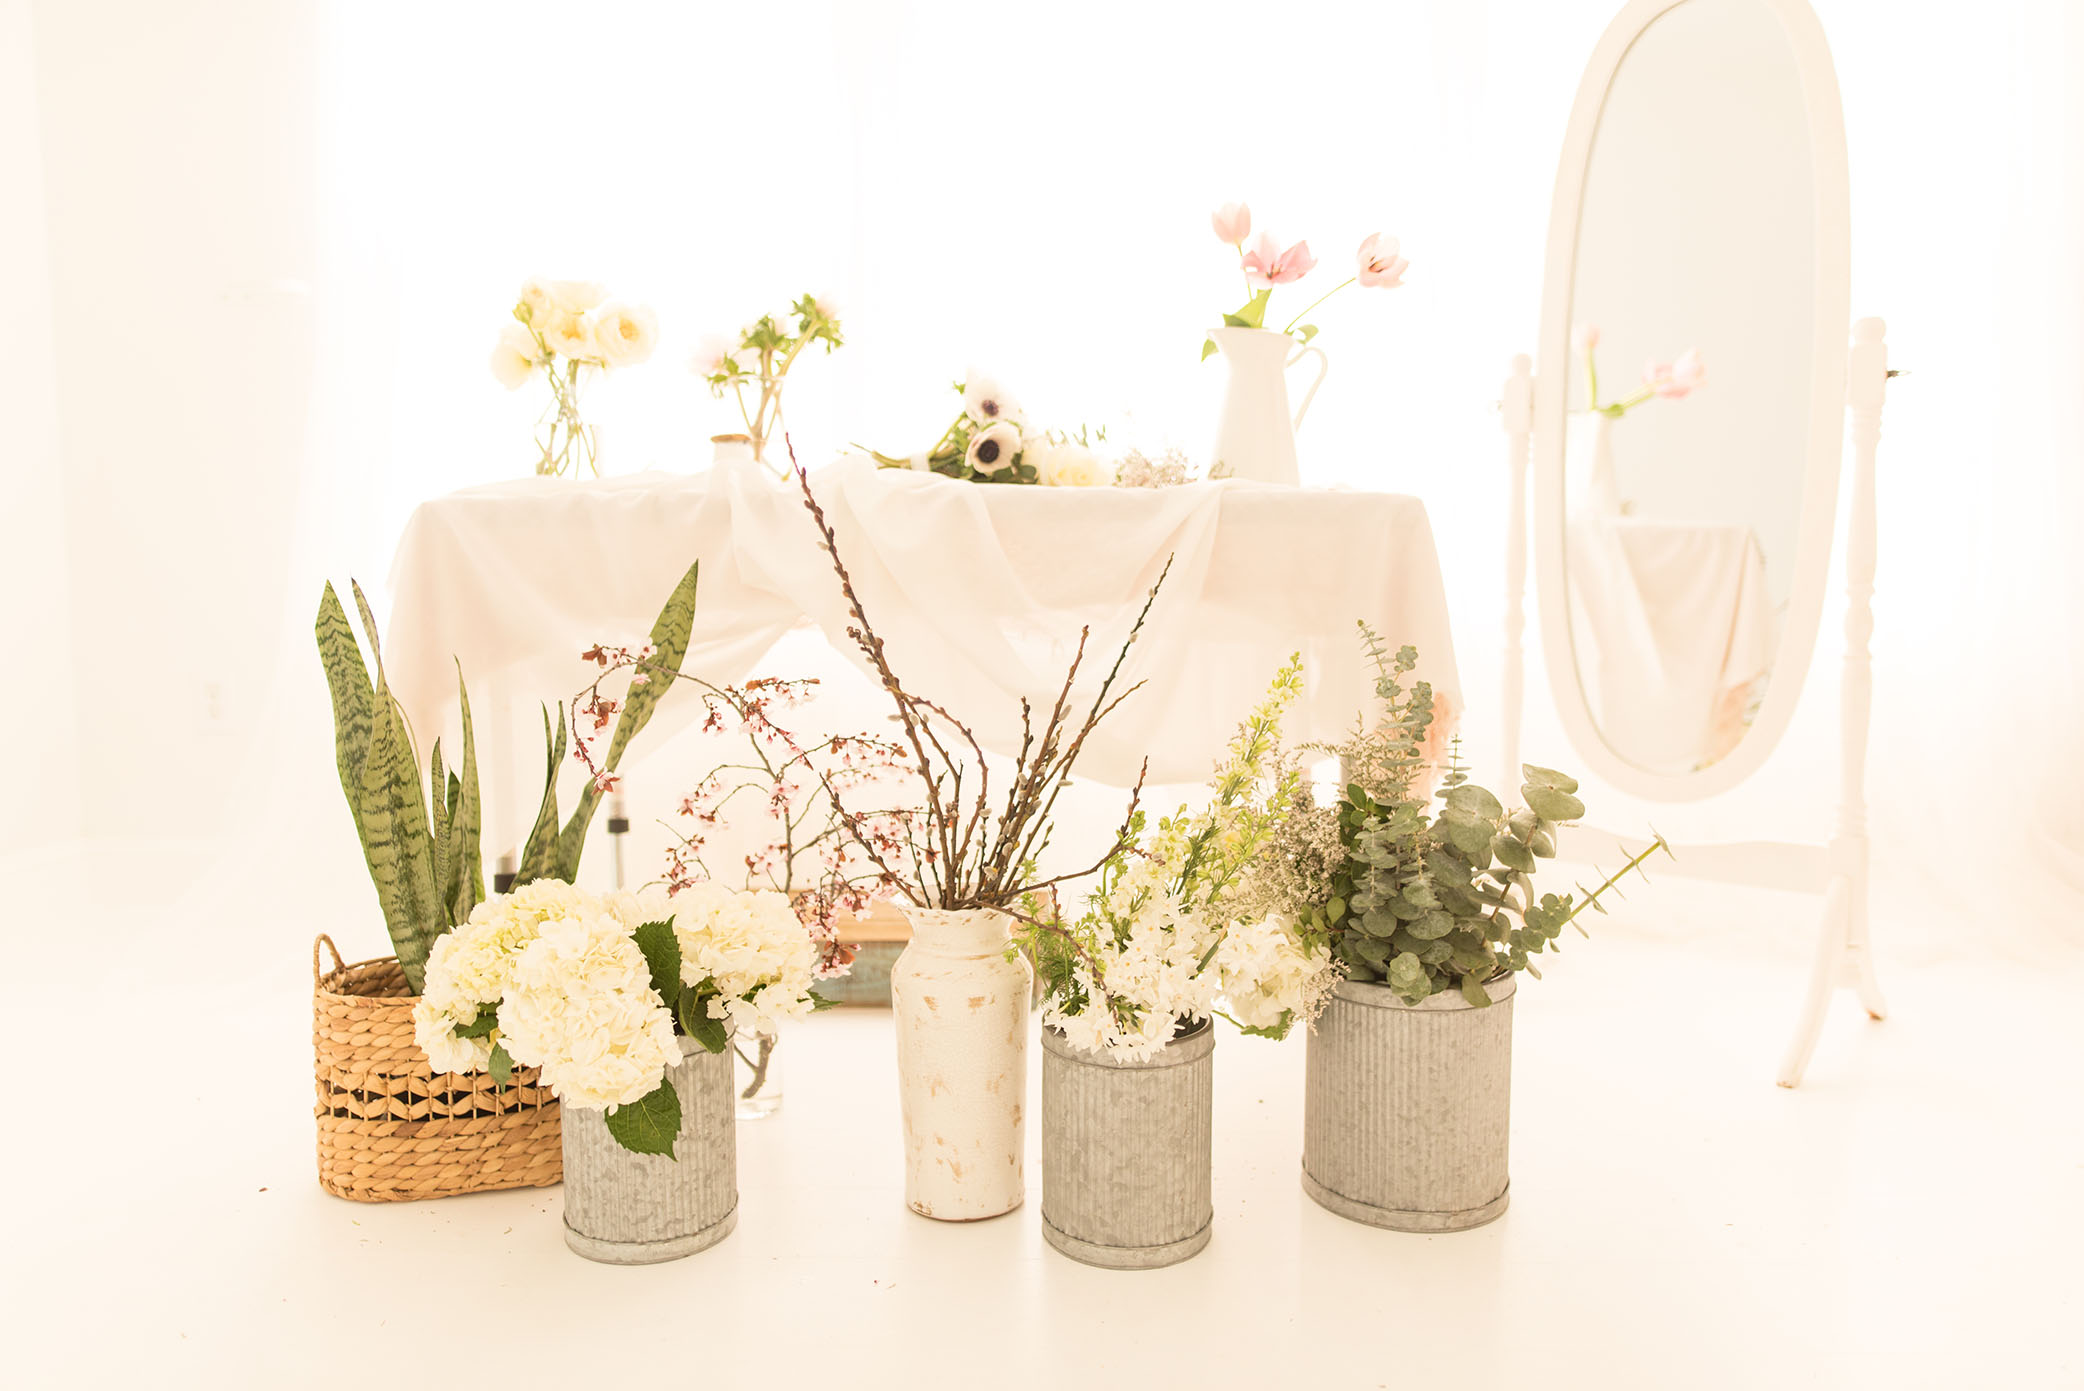 Flowers are arranged in vases. 